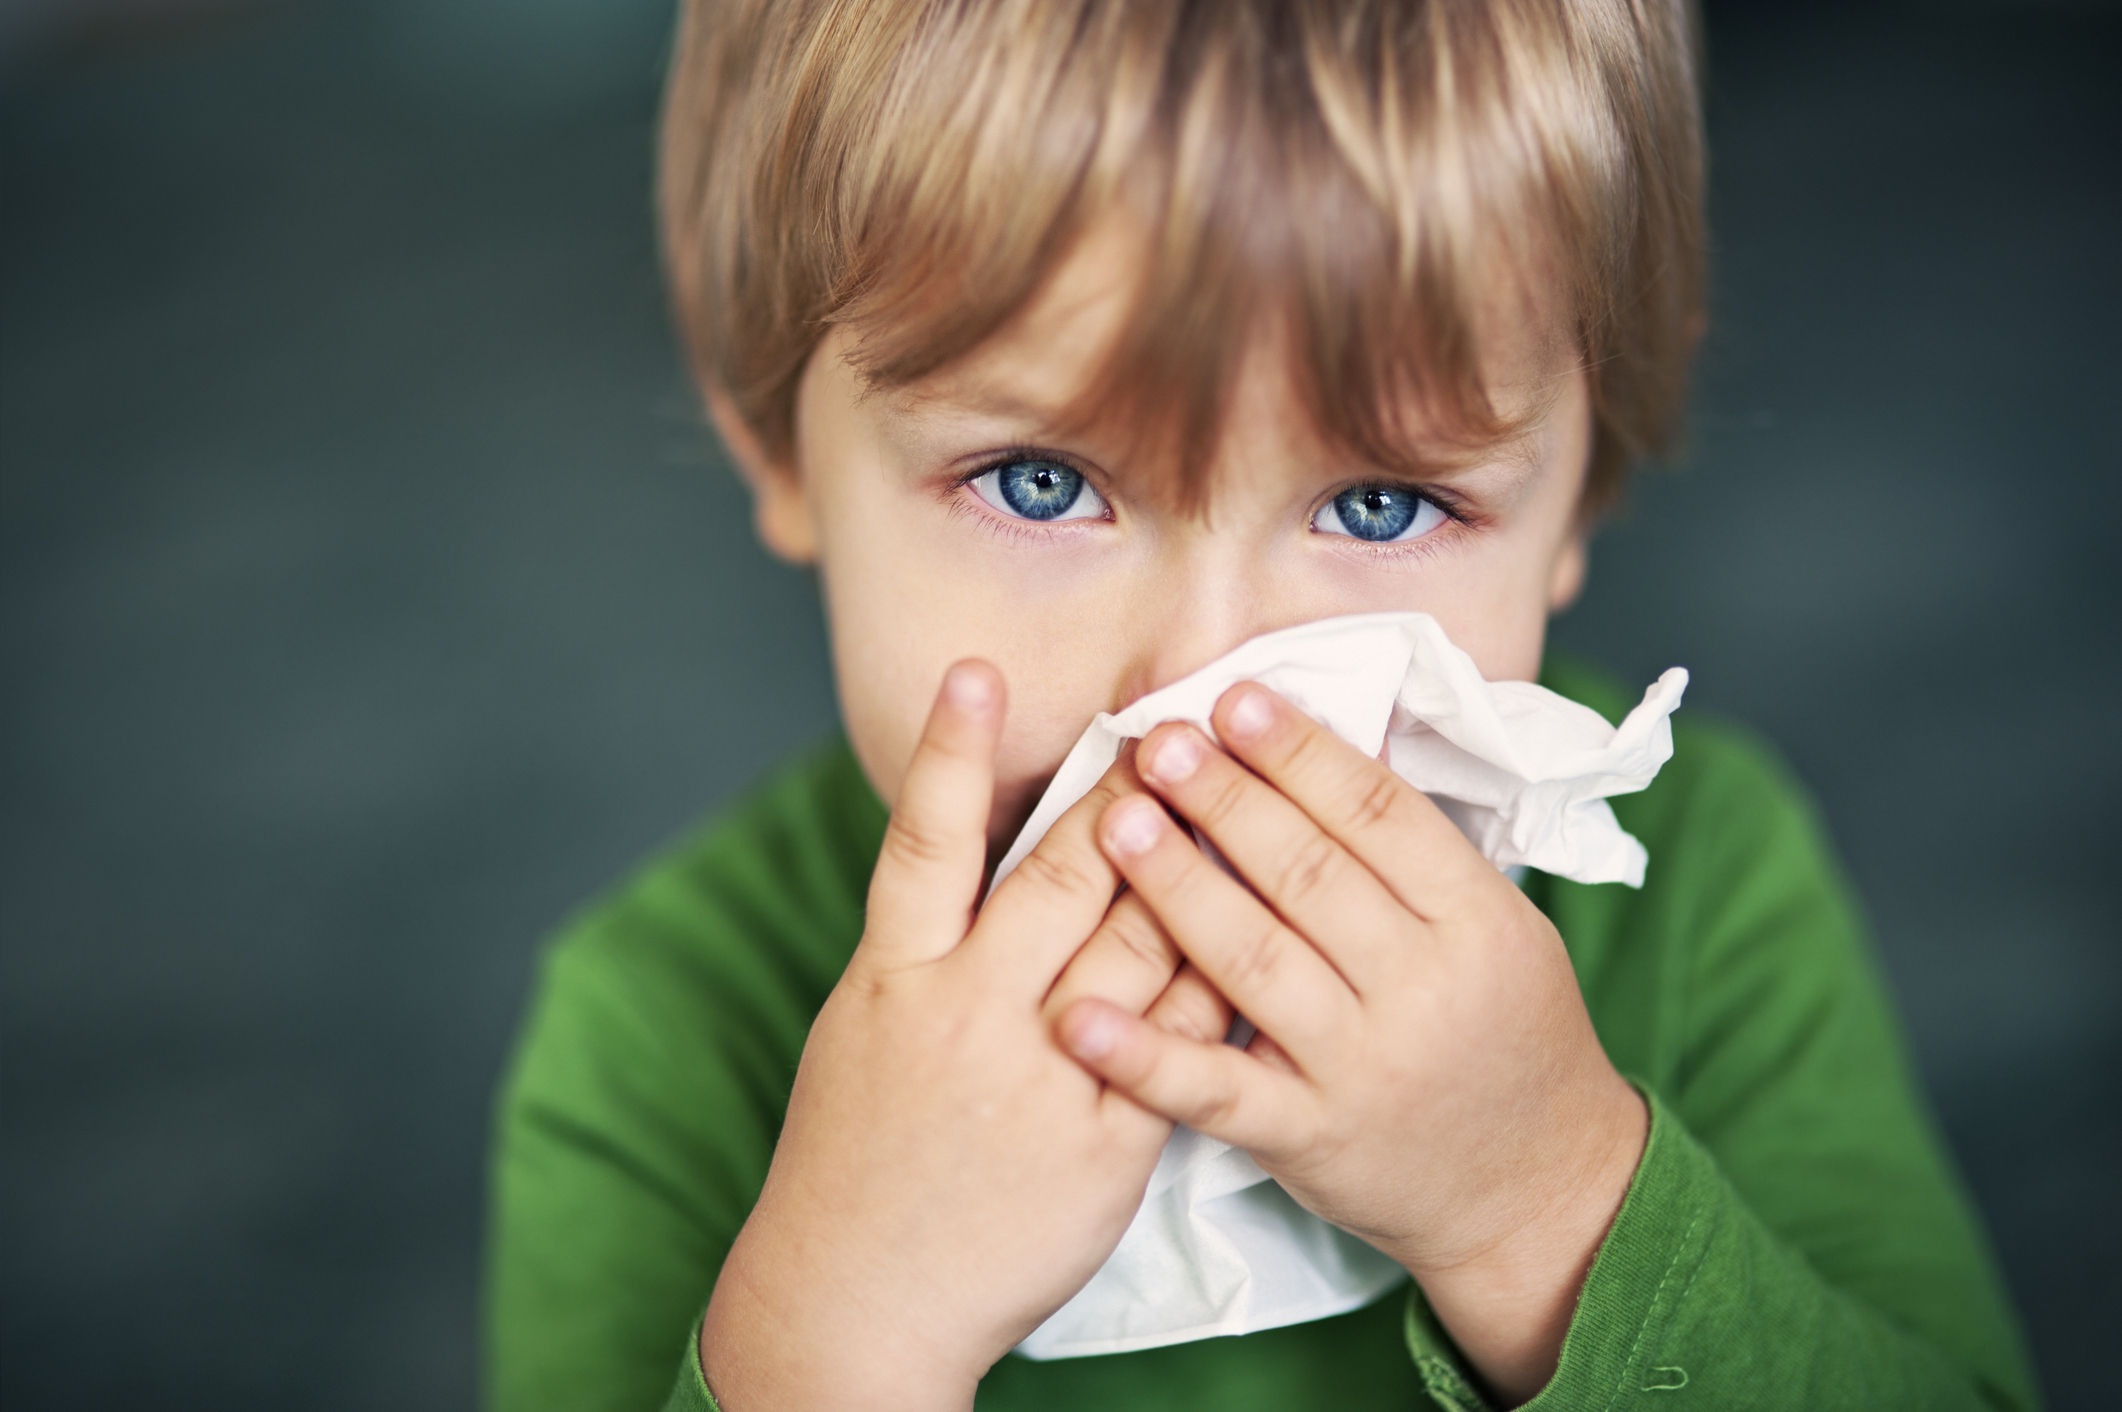 Debunking Old Wives' Tales: Your Children’s Allergies